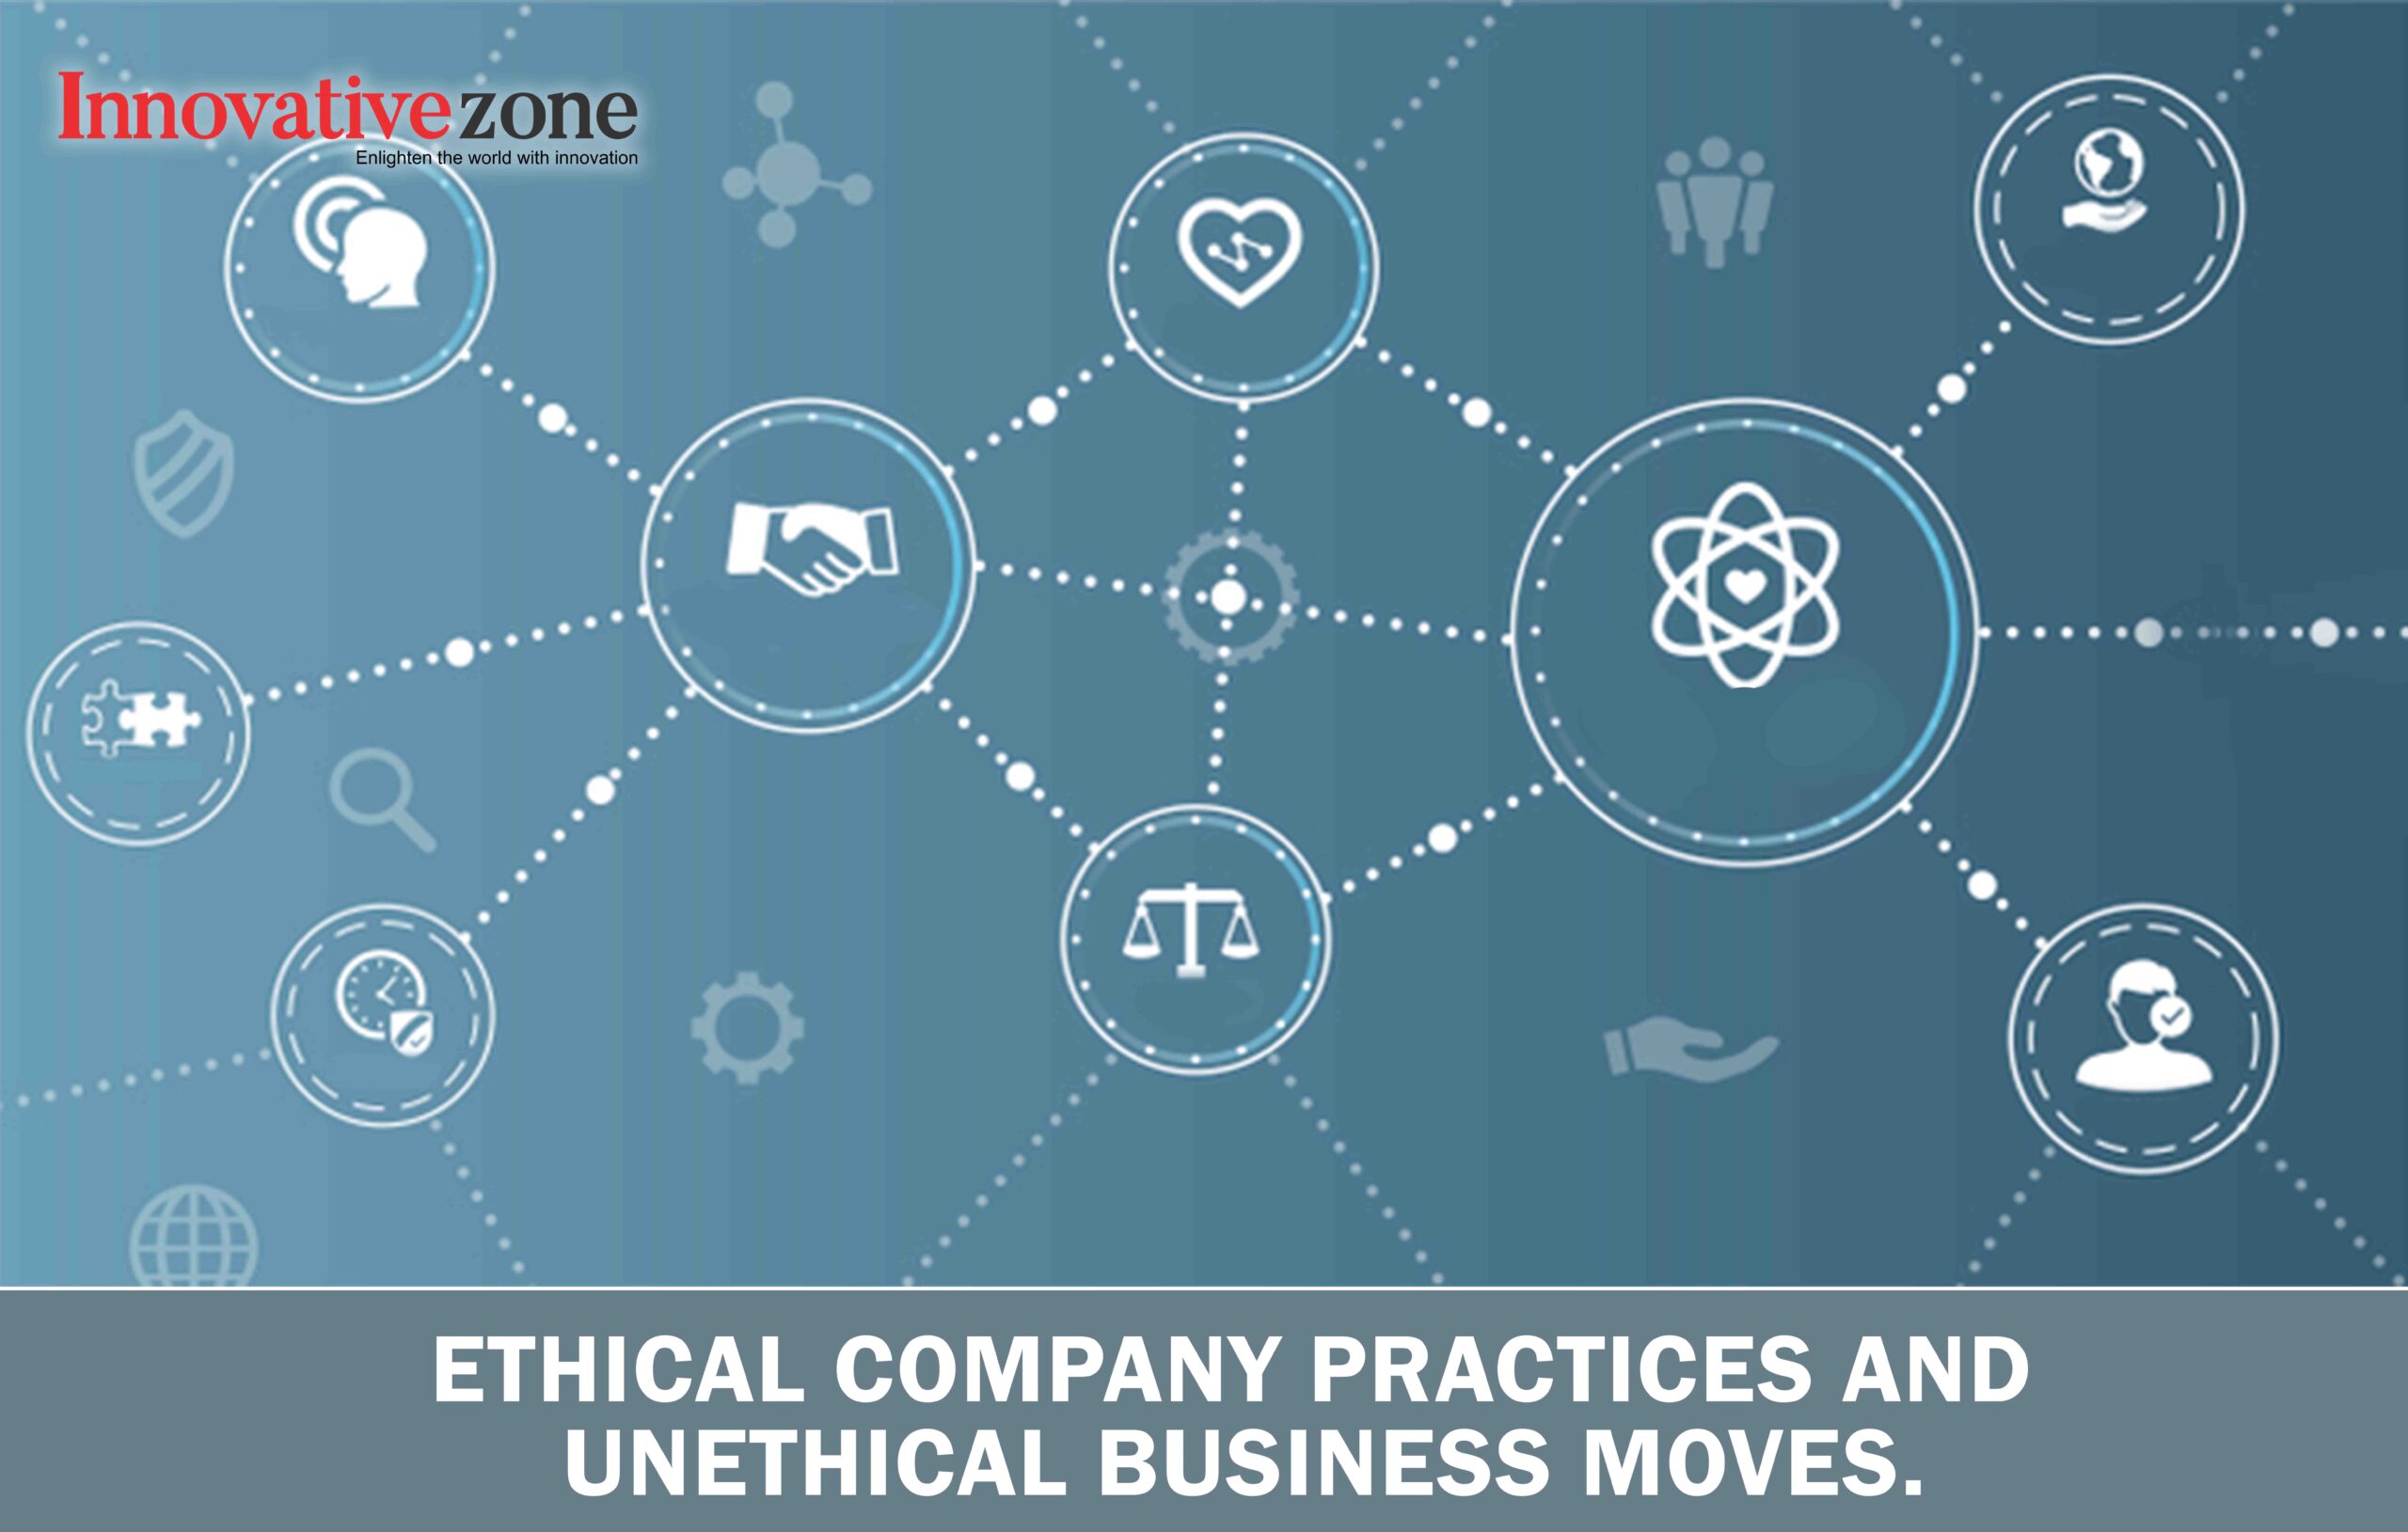 Ethical Company practices and Business moves InnovativeZone